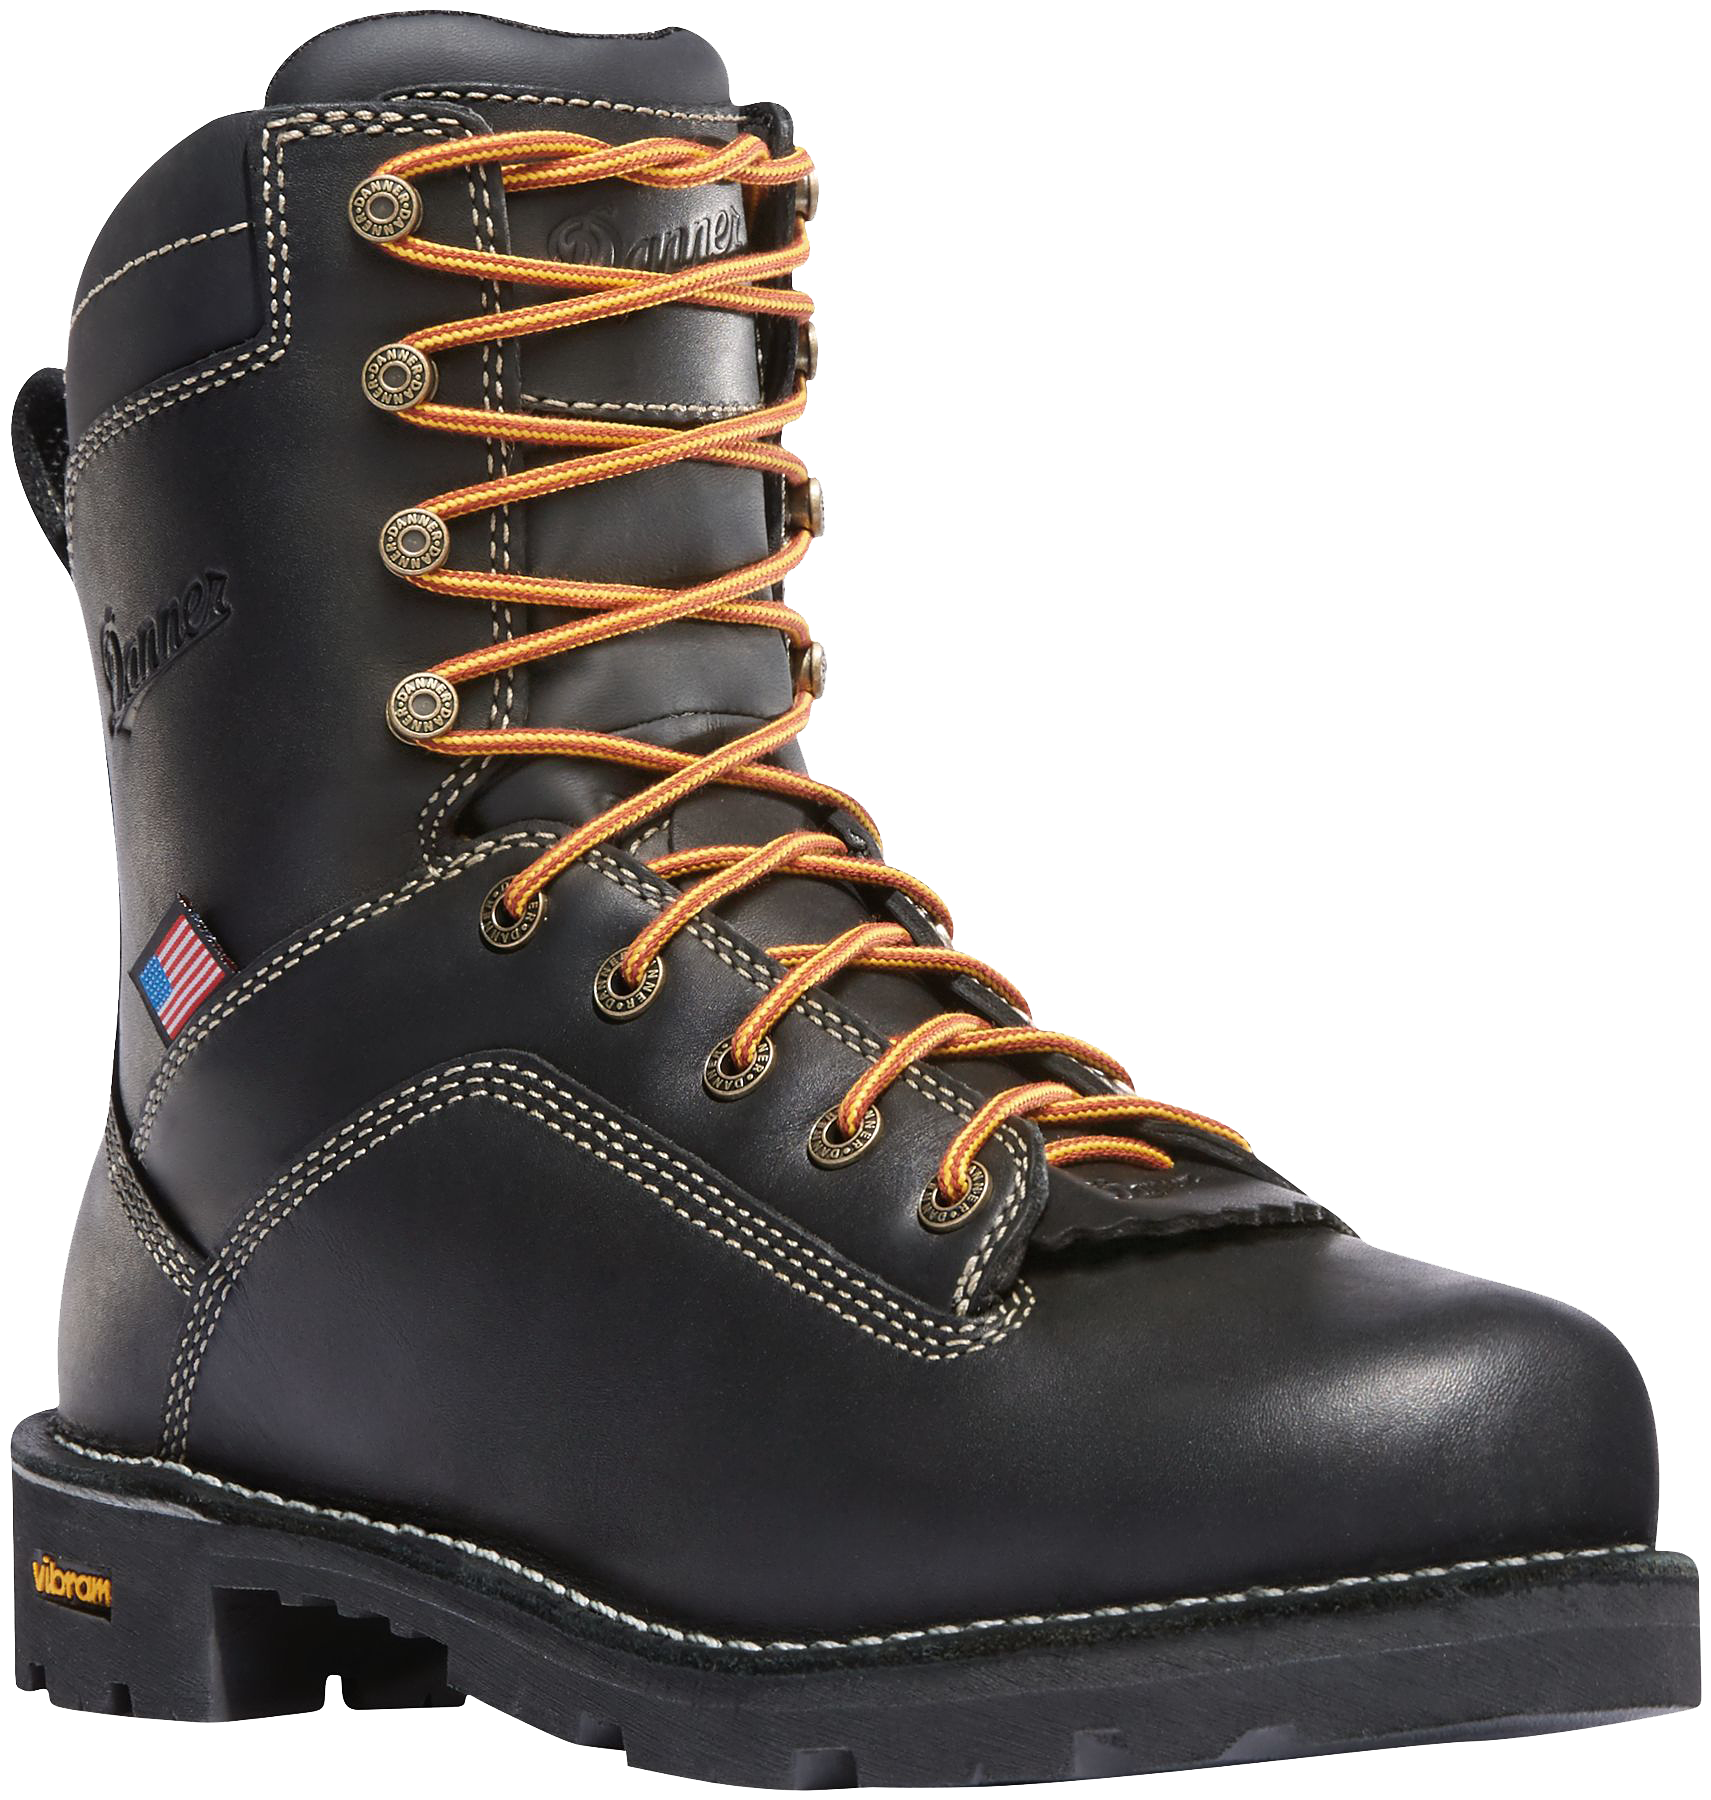 Danner Quarry USA Brown GORE-TEX Alloy Toe Work Boots for Men - Black - 13M